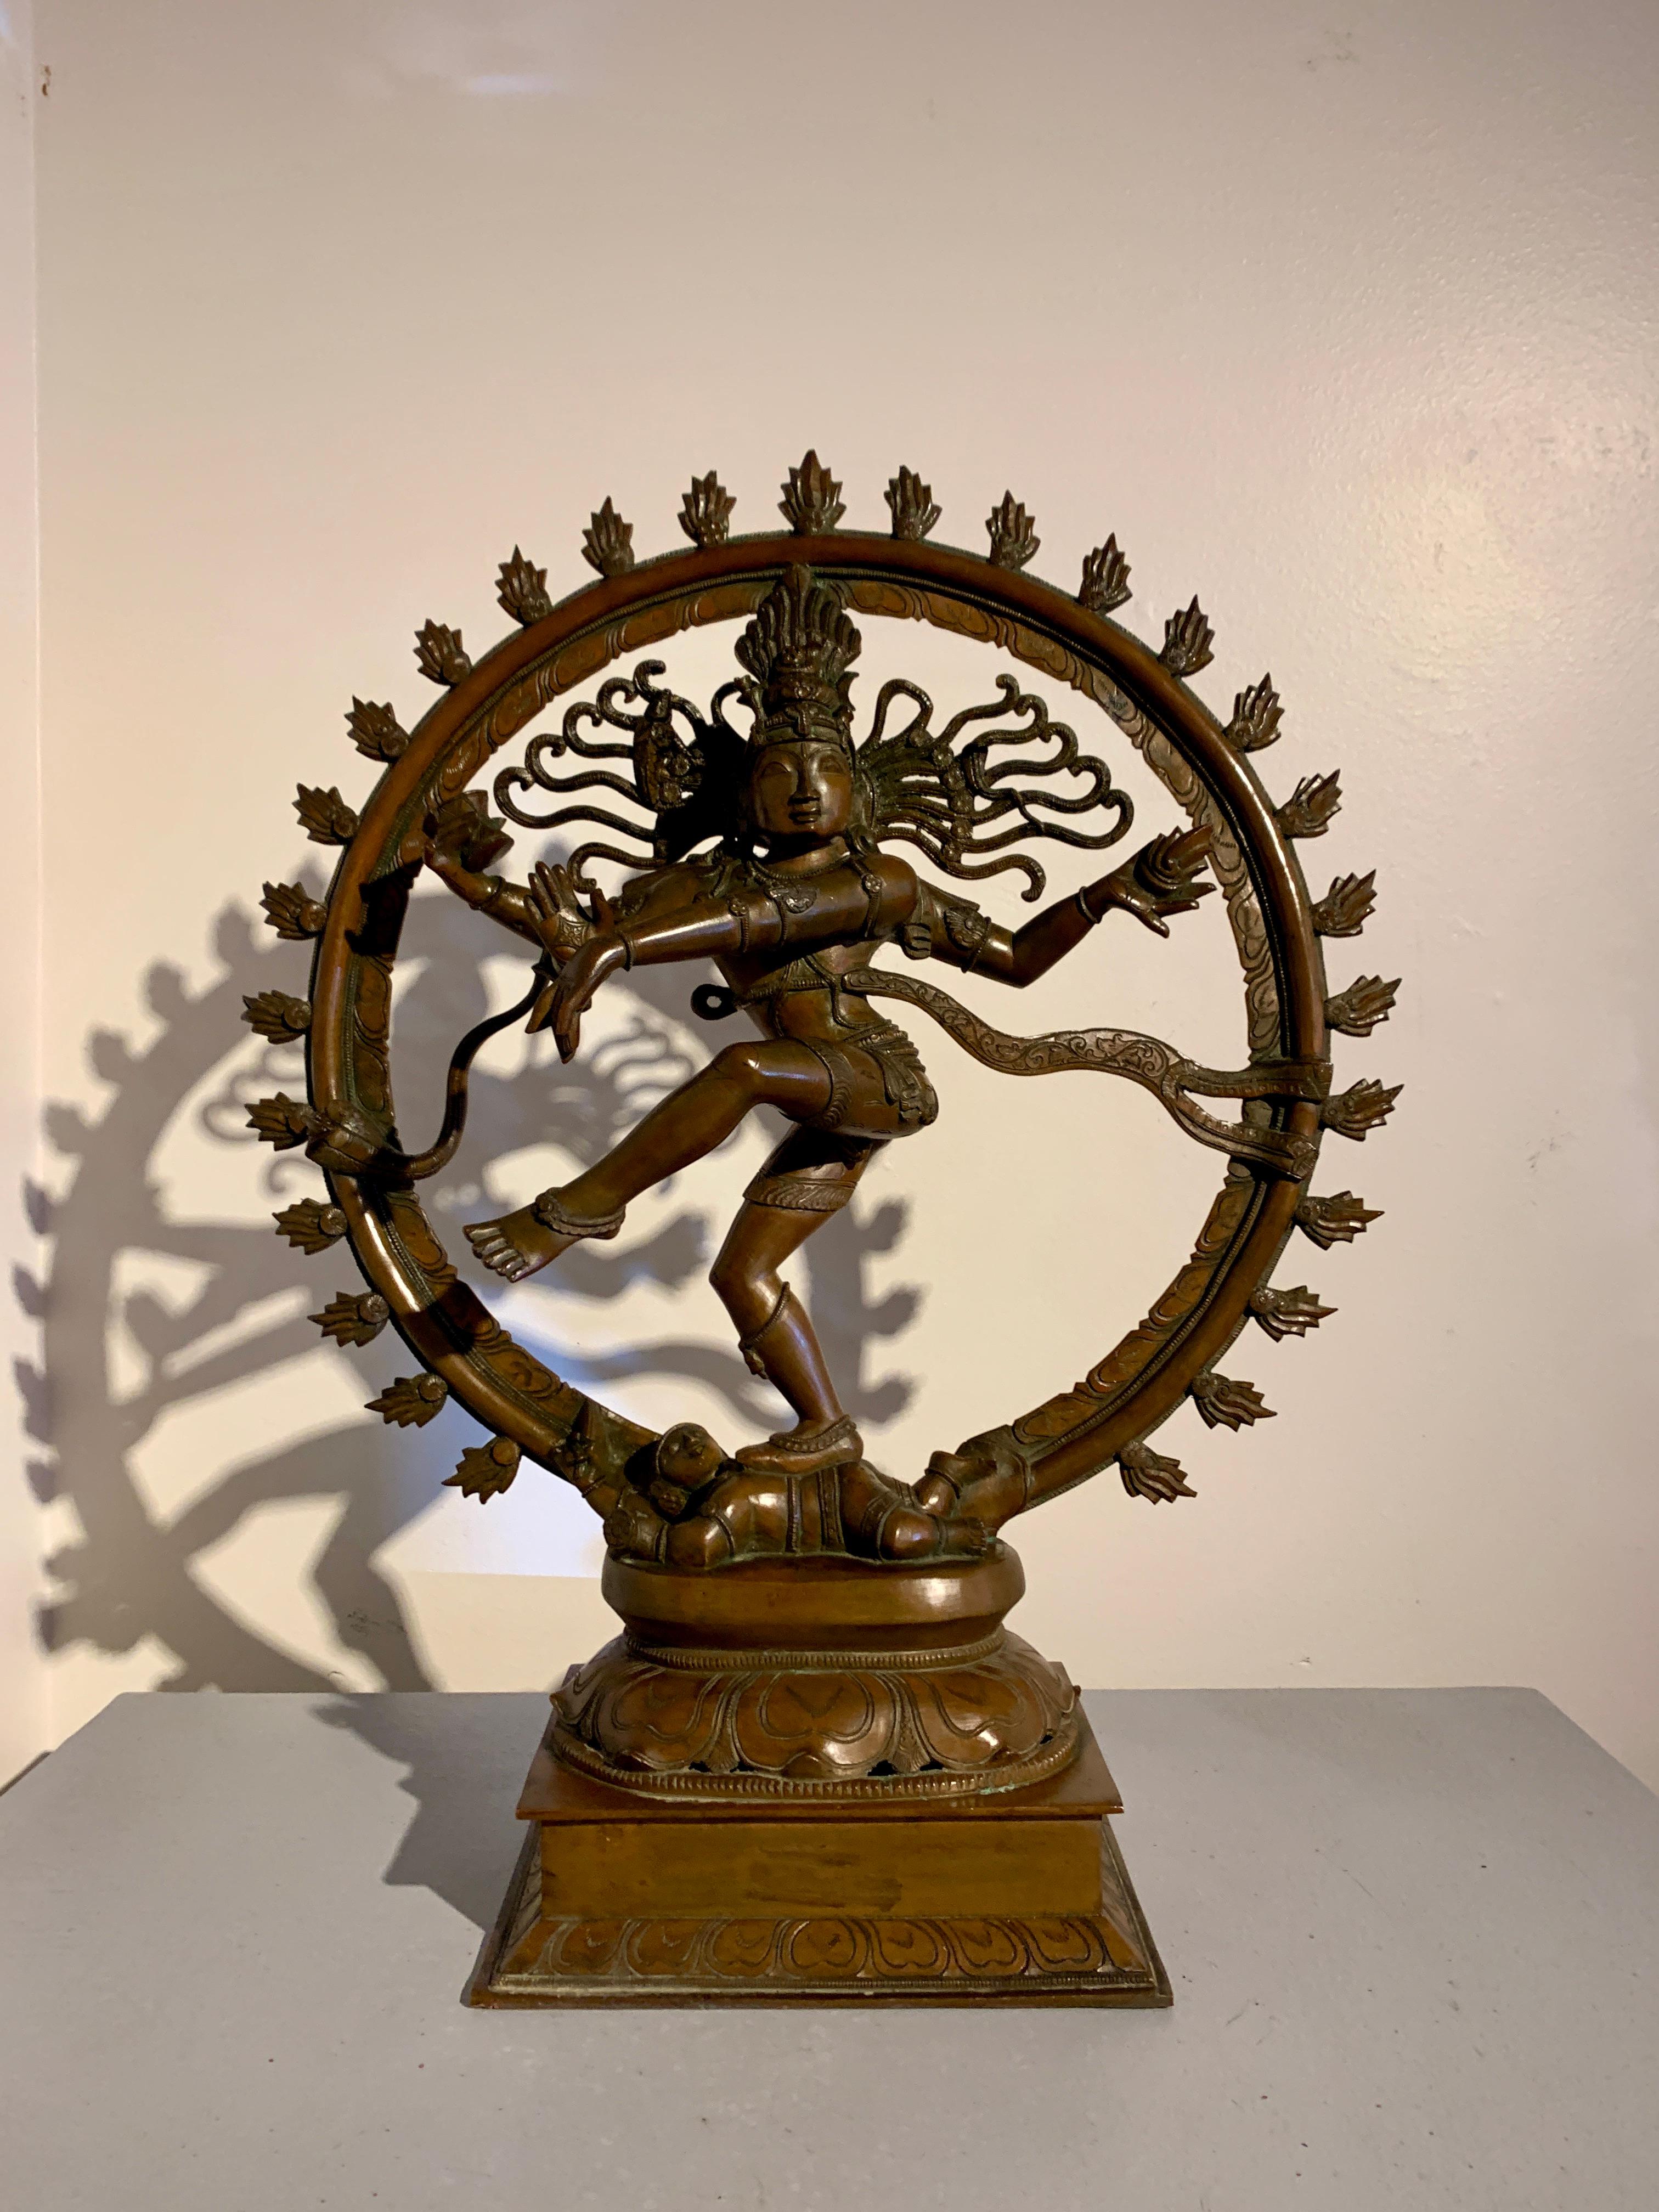 A heavy and well cast South Indian bronze figure of Shiva Nataraja, or Shiva as Lord of the Dance, in the Chola style, late 19th or early 20th century, India. 

Shiva is portrayed here in his form as Nataraja, the Lord of the Dance. An iconic and